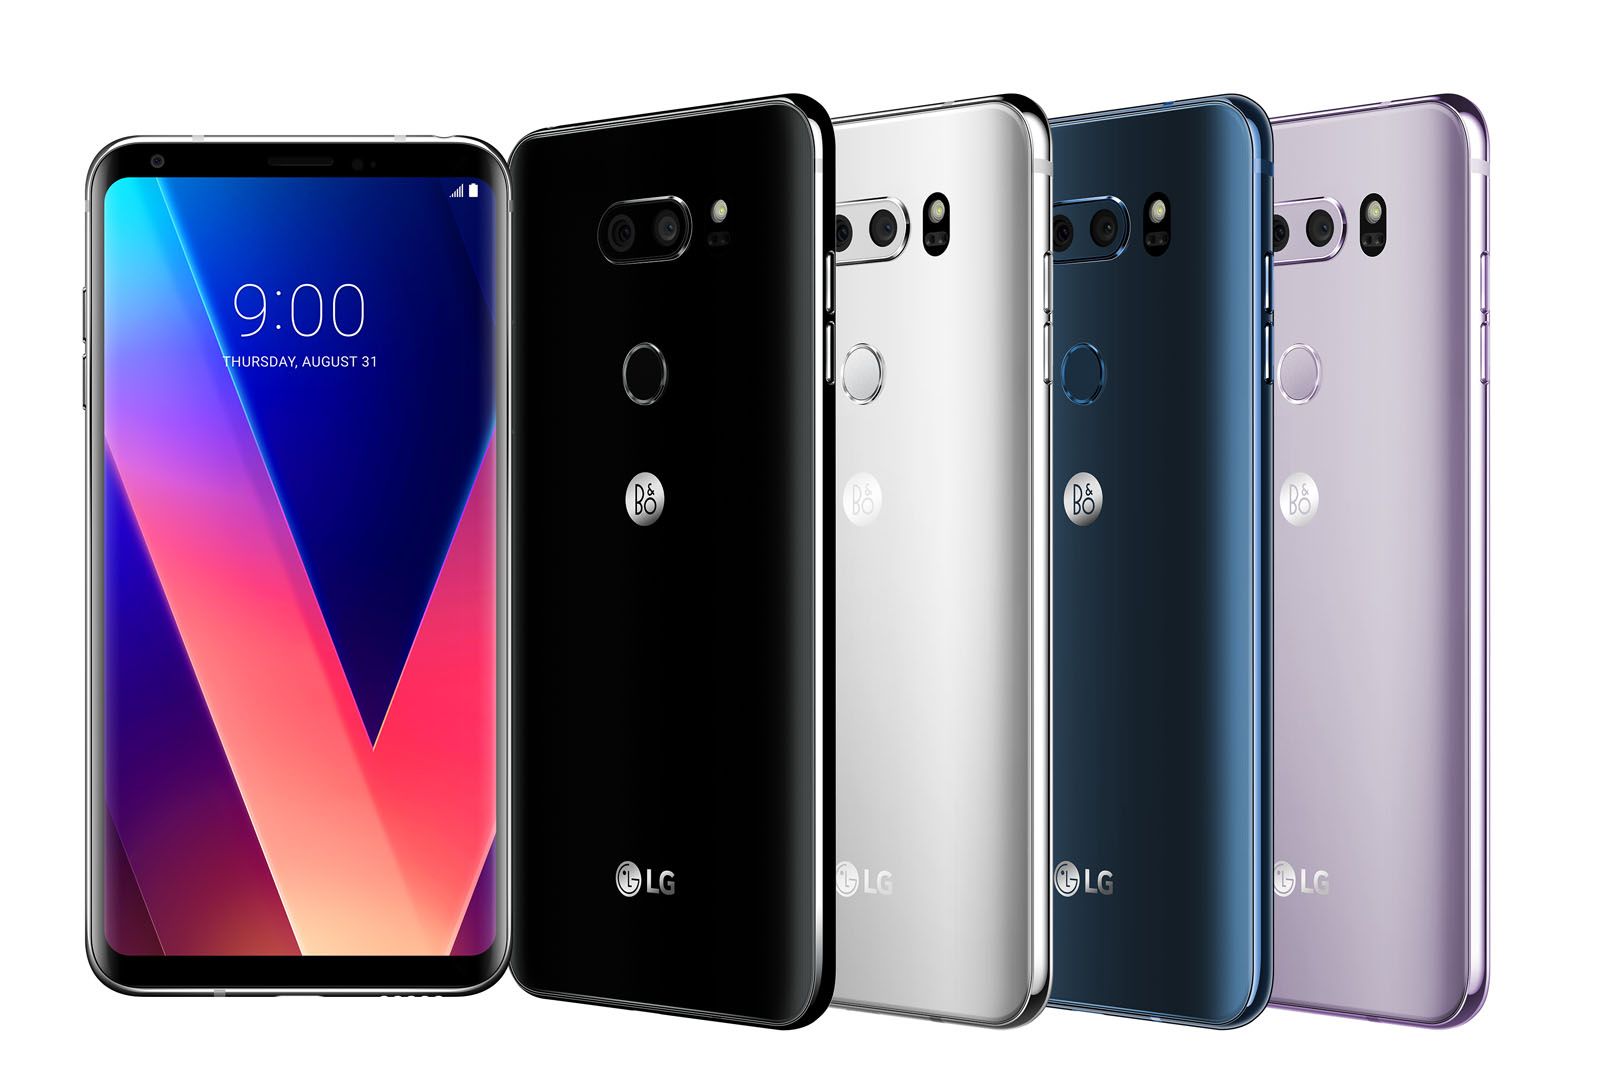 Lg Officially Launches The Lg V30 A More Refined Flagship But Still For The Creatives image 1